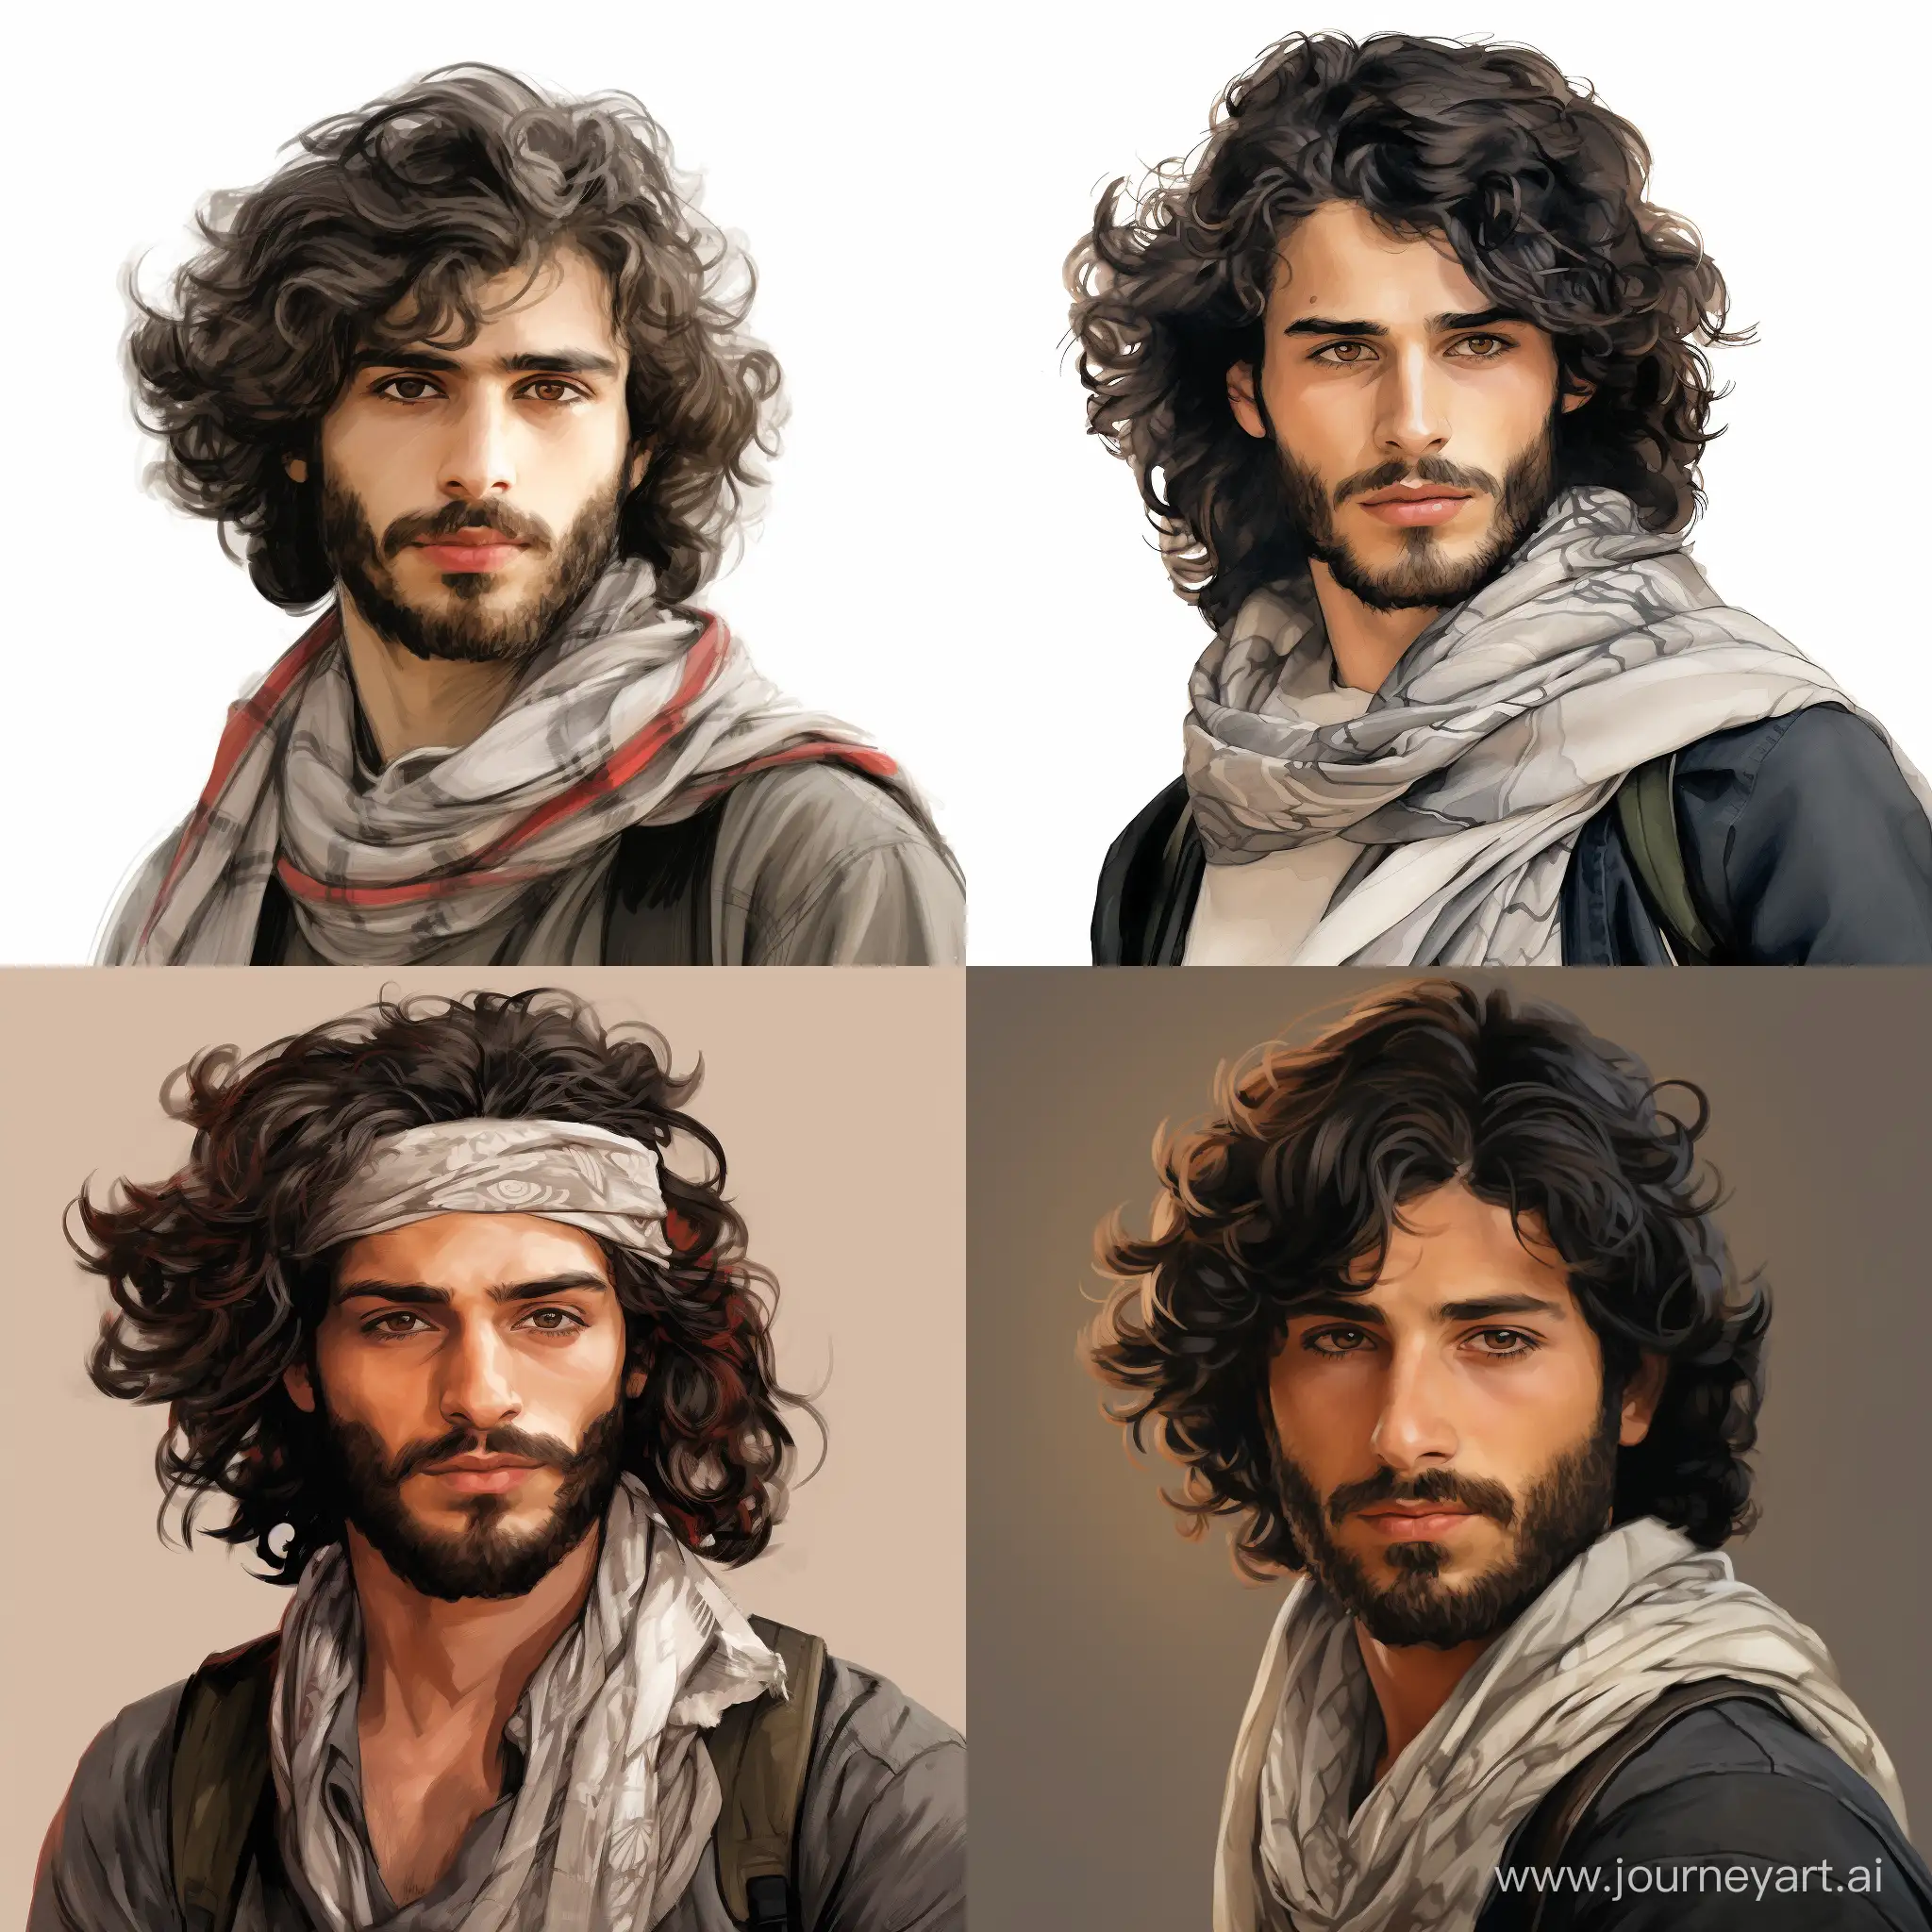 Draw a Palestinian, young man with pale skin in his 20s with a Keffiyeh worn as a scarf and medium length curly black hair styles as a mullet and a connected beard that is not very thick